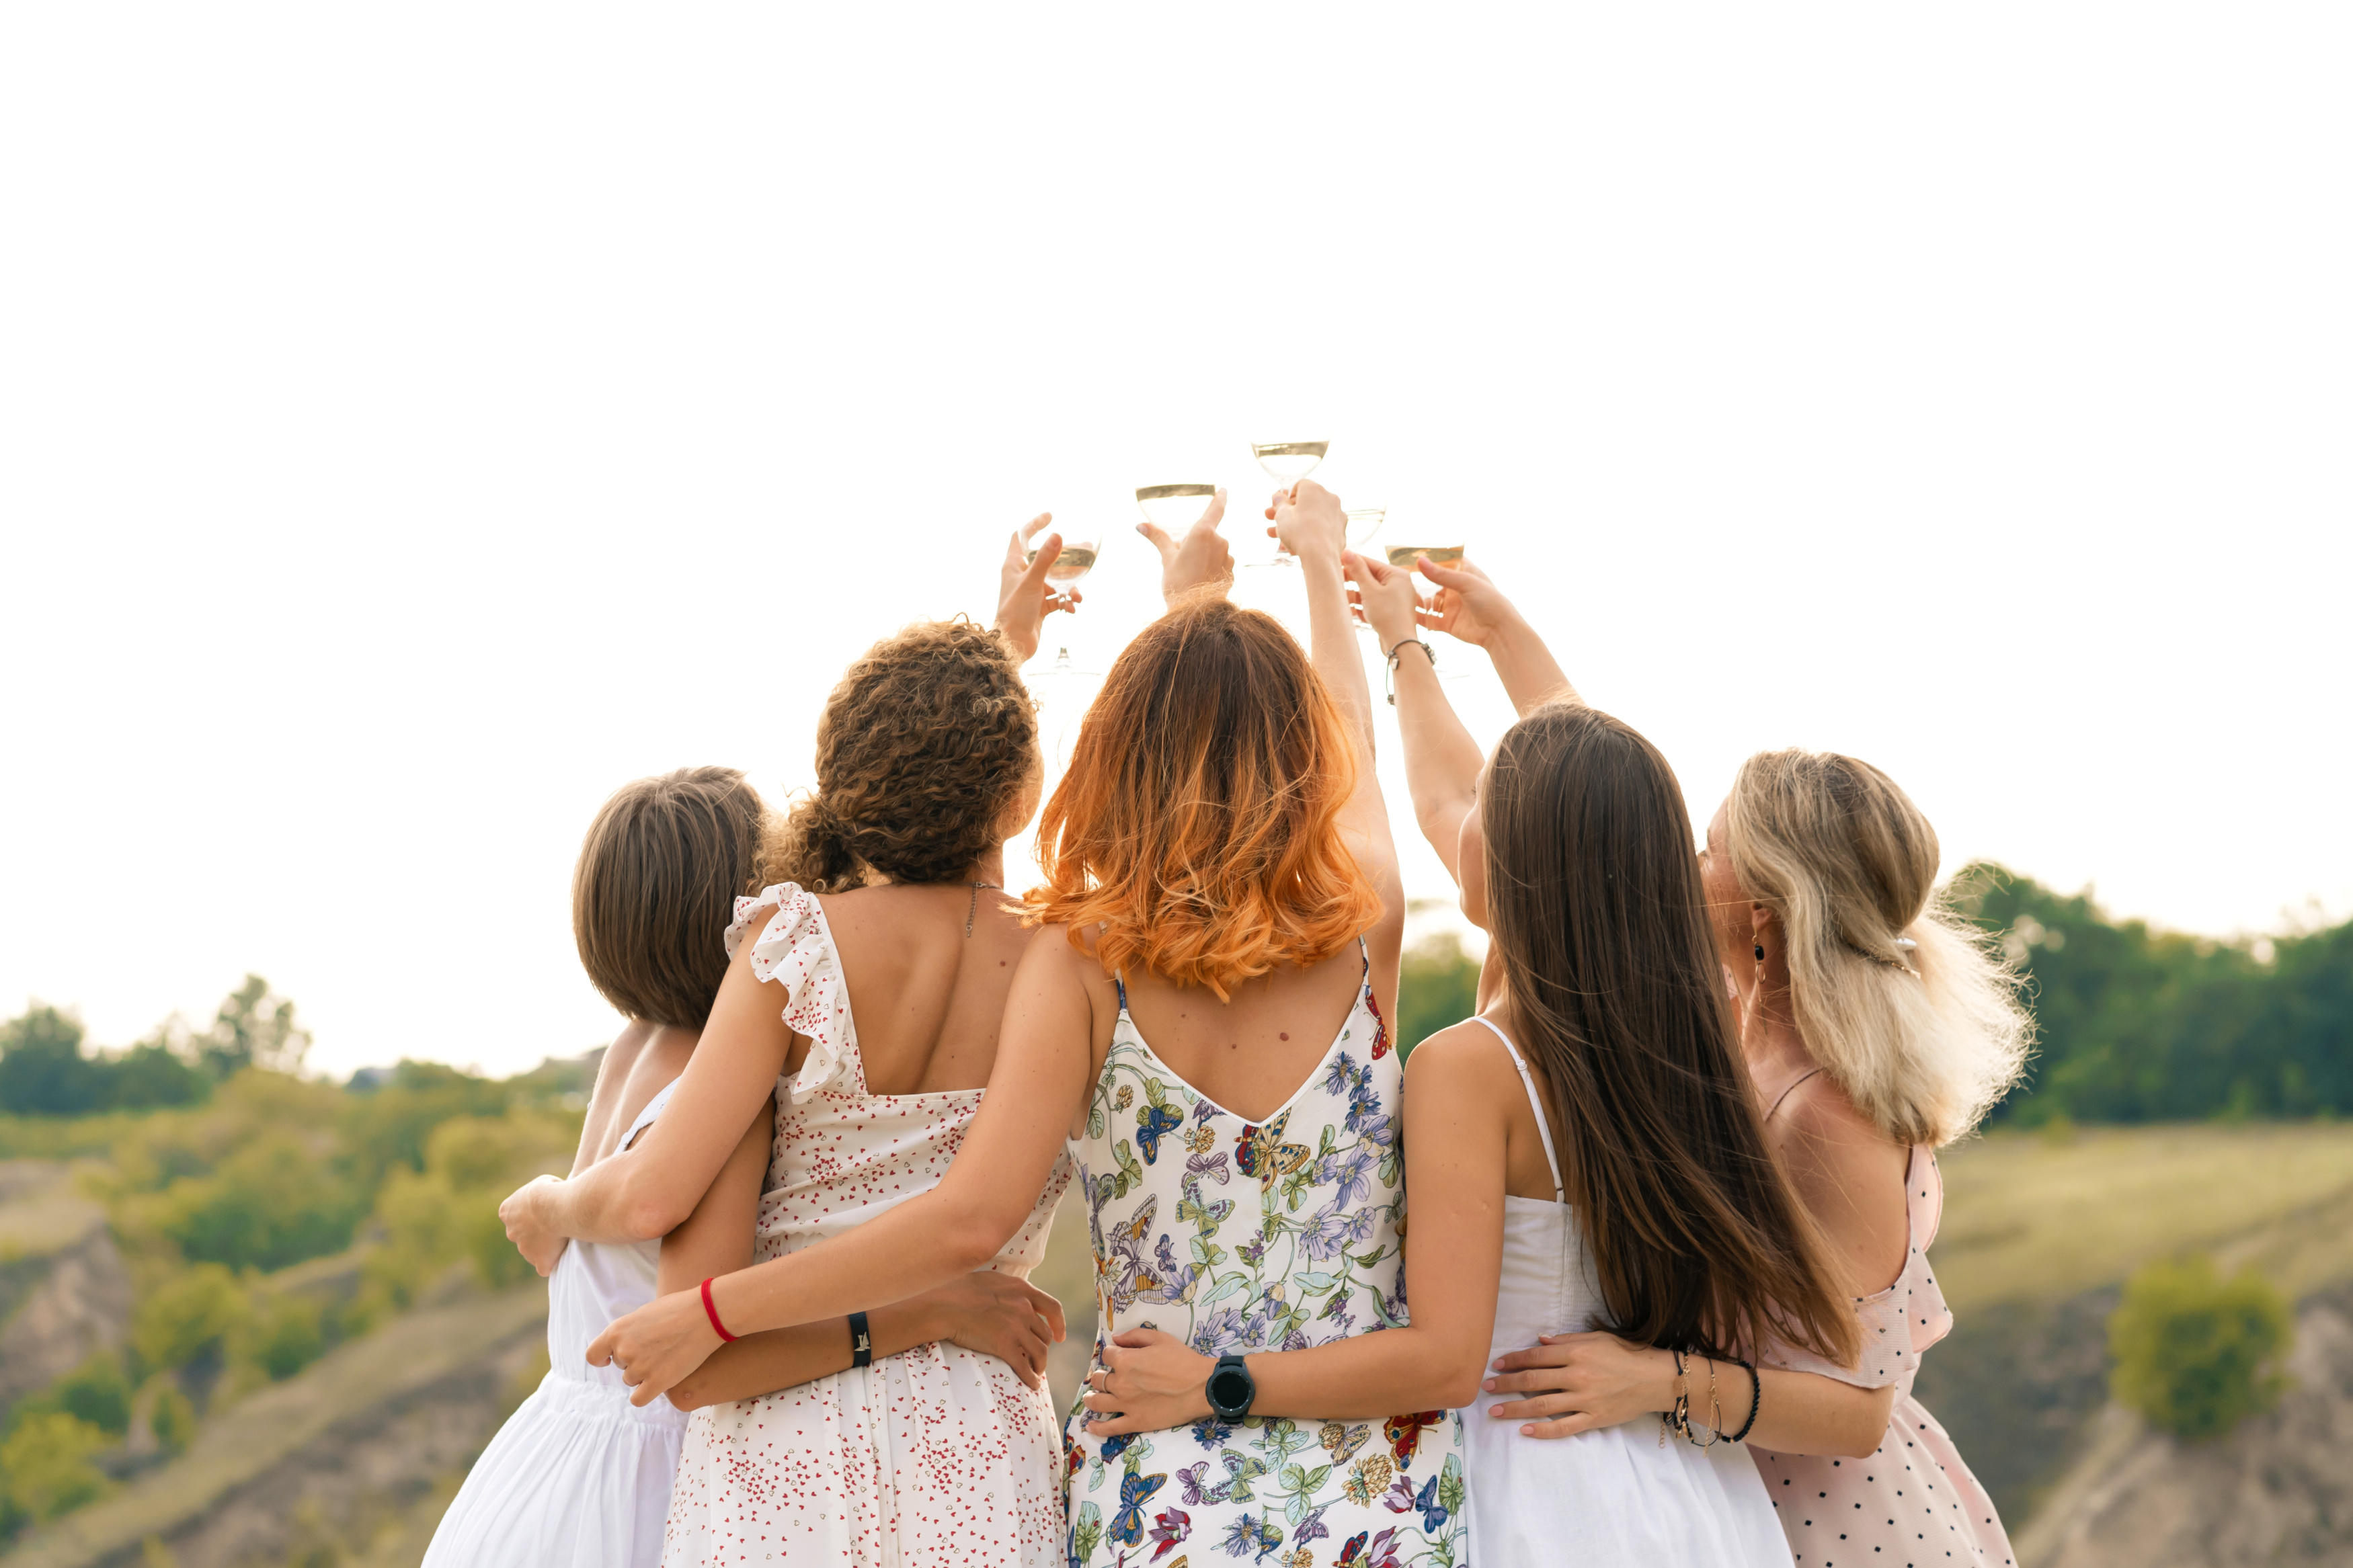 50 Friends Photoshoot Ideas to Try with Besties